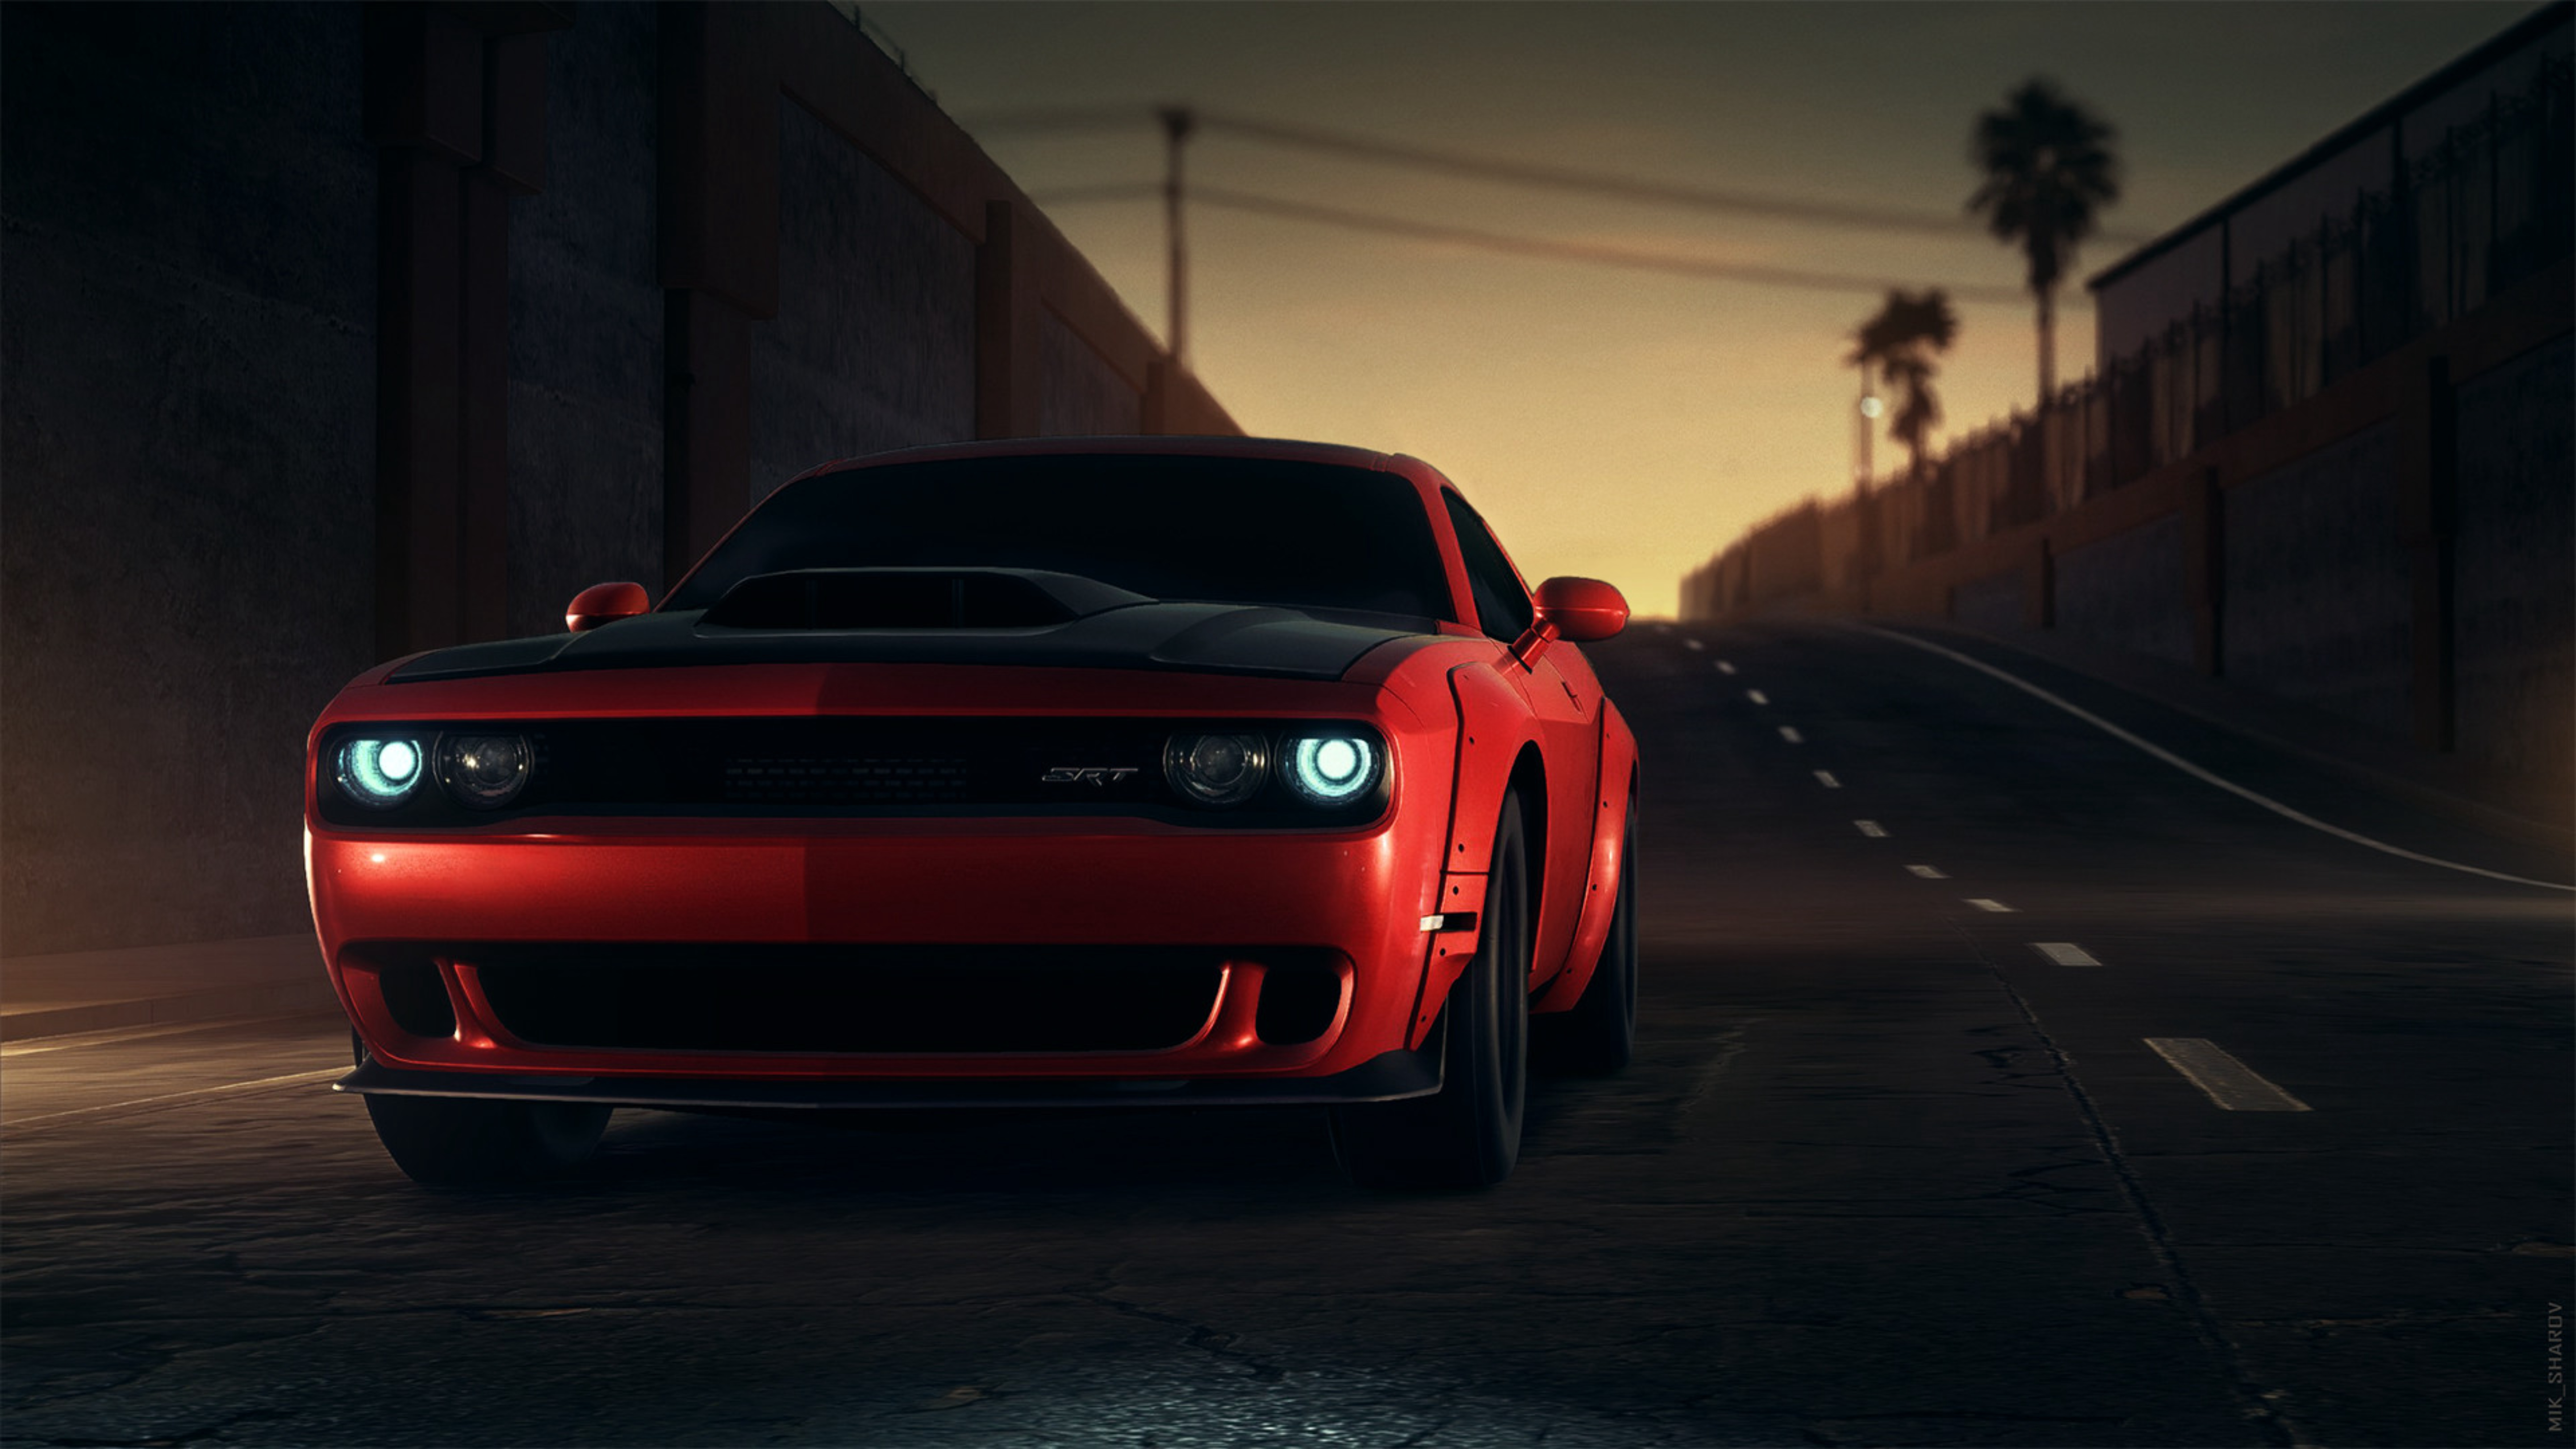 cars, sports car, front view, headlights, dodge srt, dodge, sports, red, lights phone background